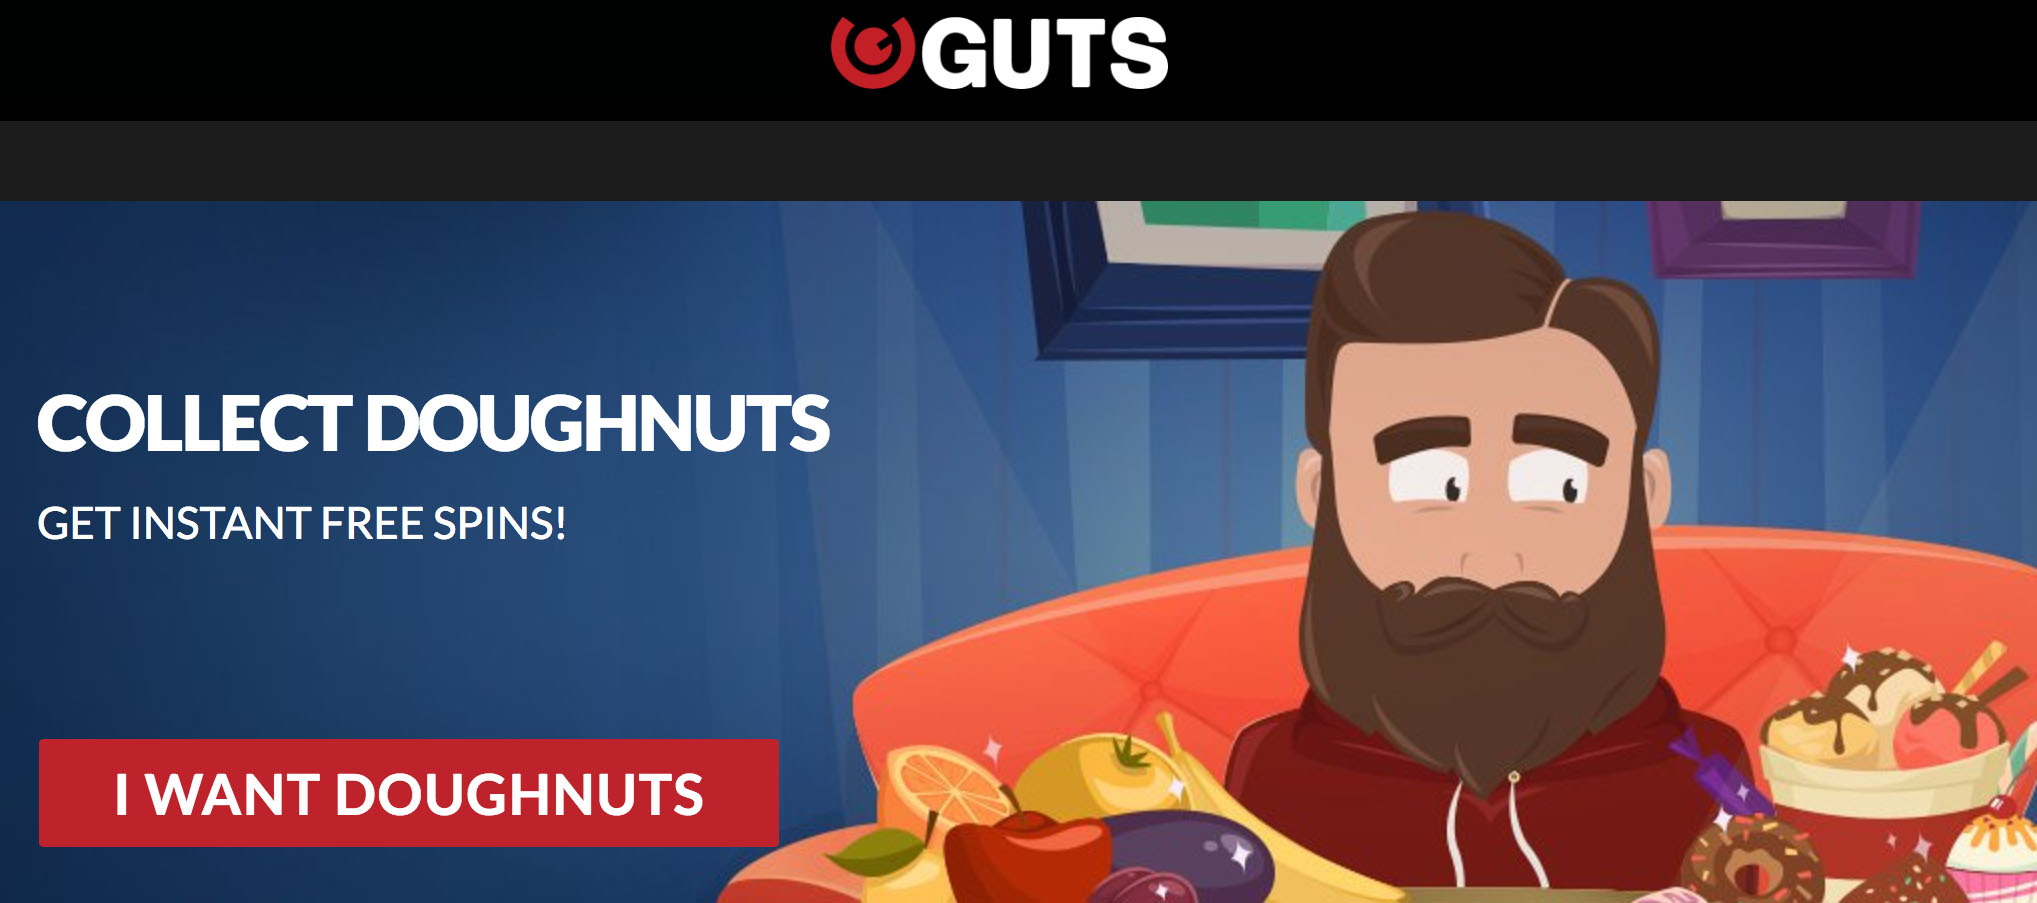 GUTS CASINO - Collect Doughnuts get free spins